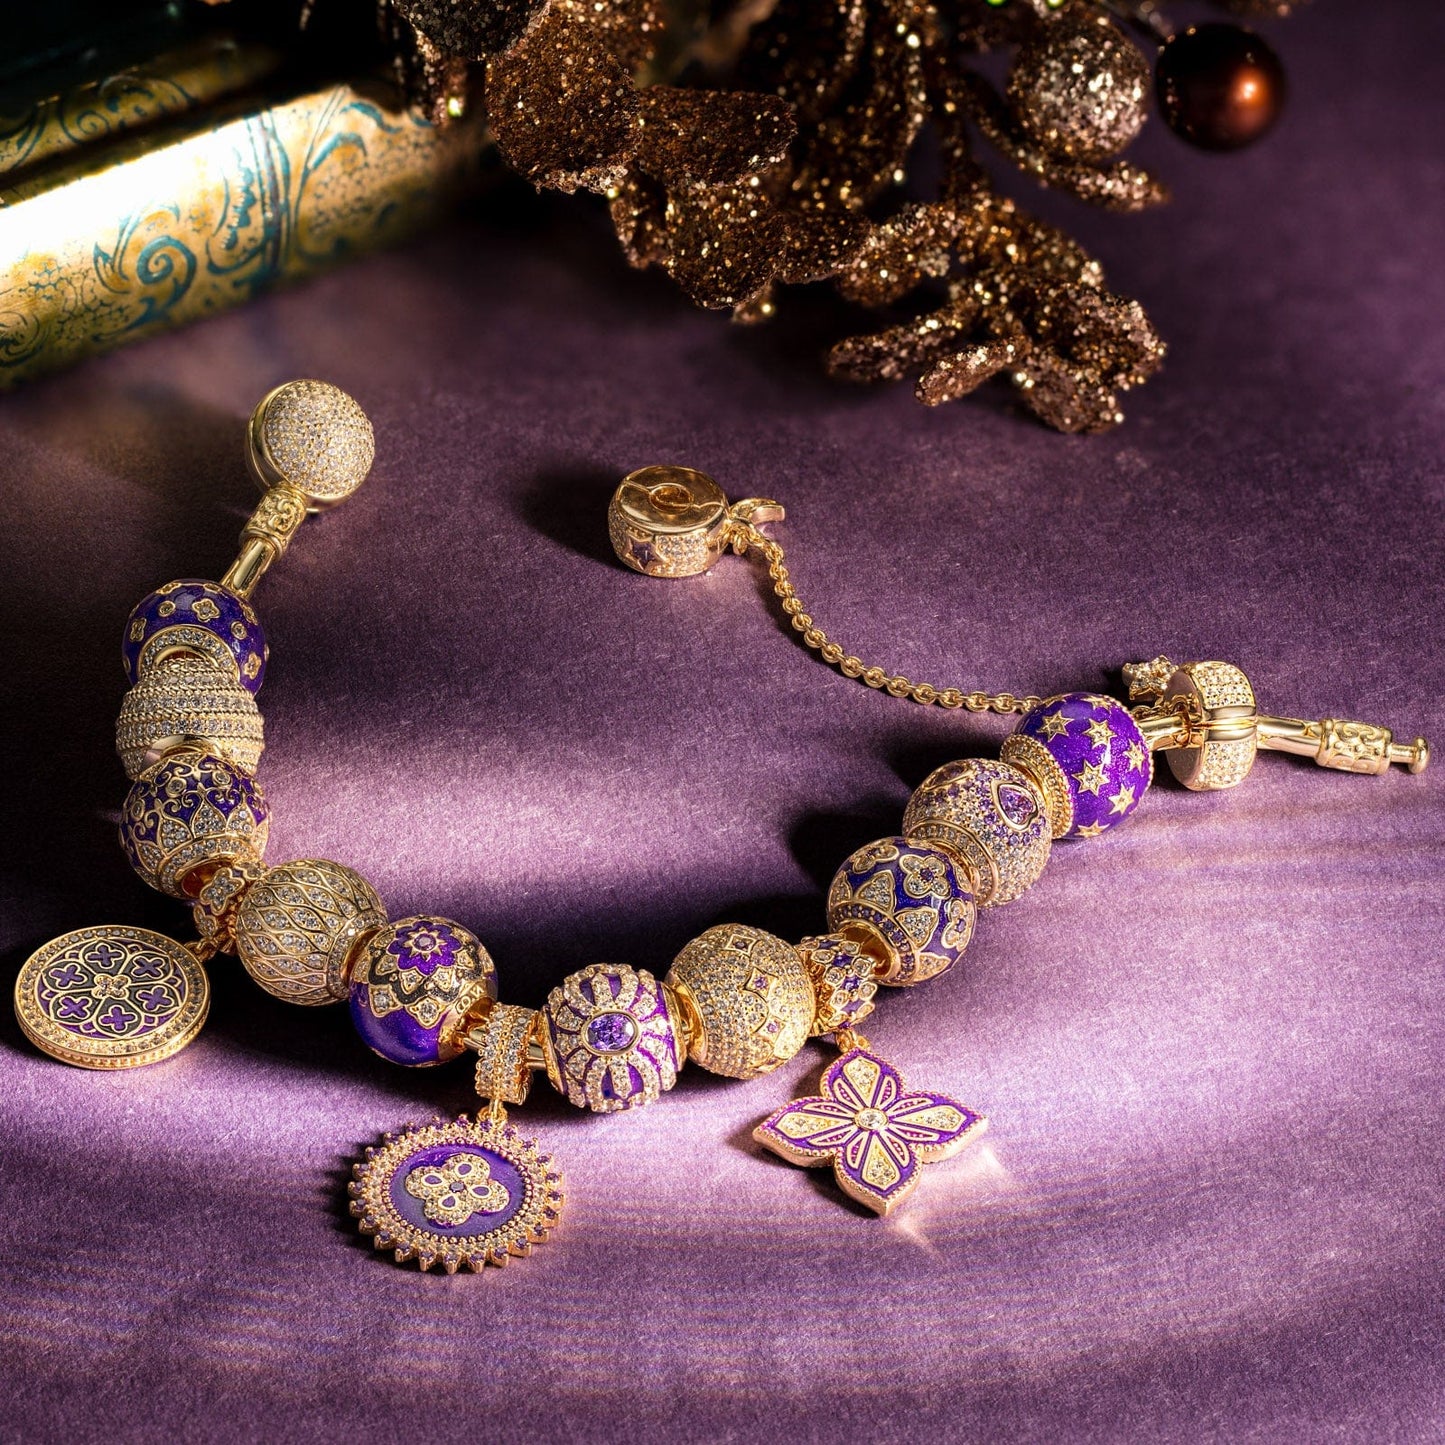 Sterling Silver Violet Dreamland Charms Bracelet Set With Enamel In 14K Gold Plated - Exclusive Christmas Gift Box